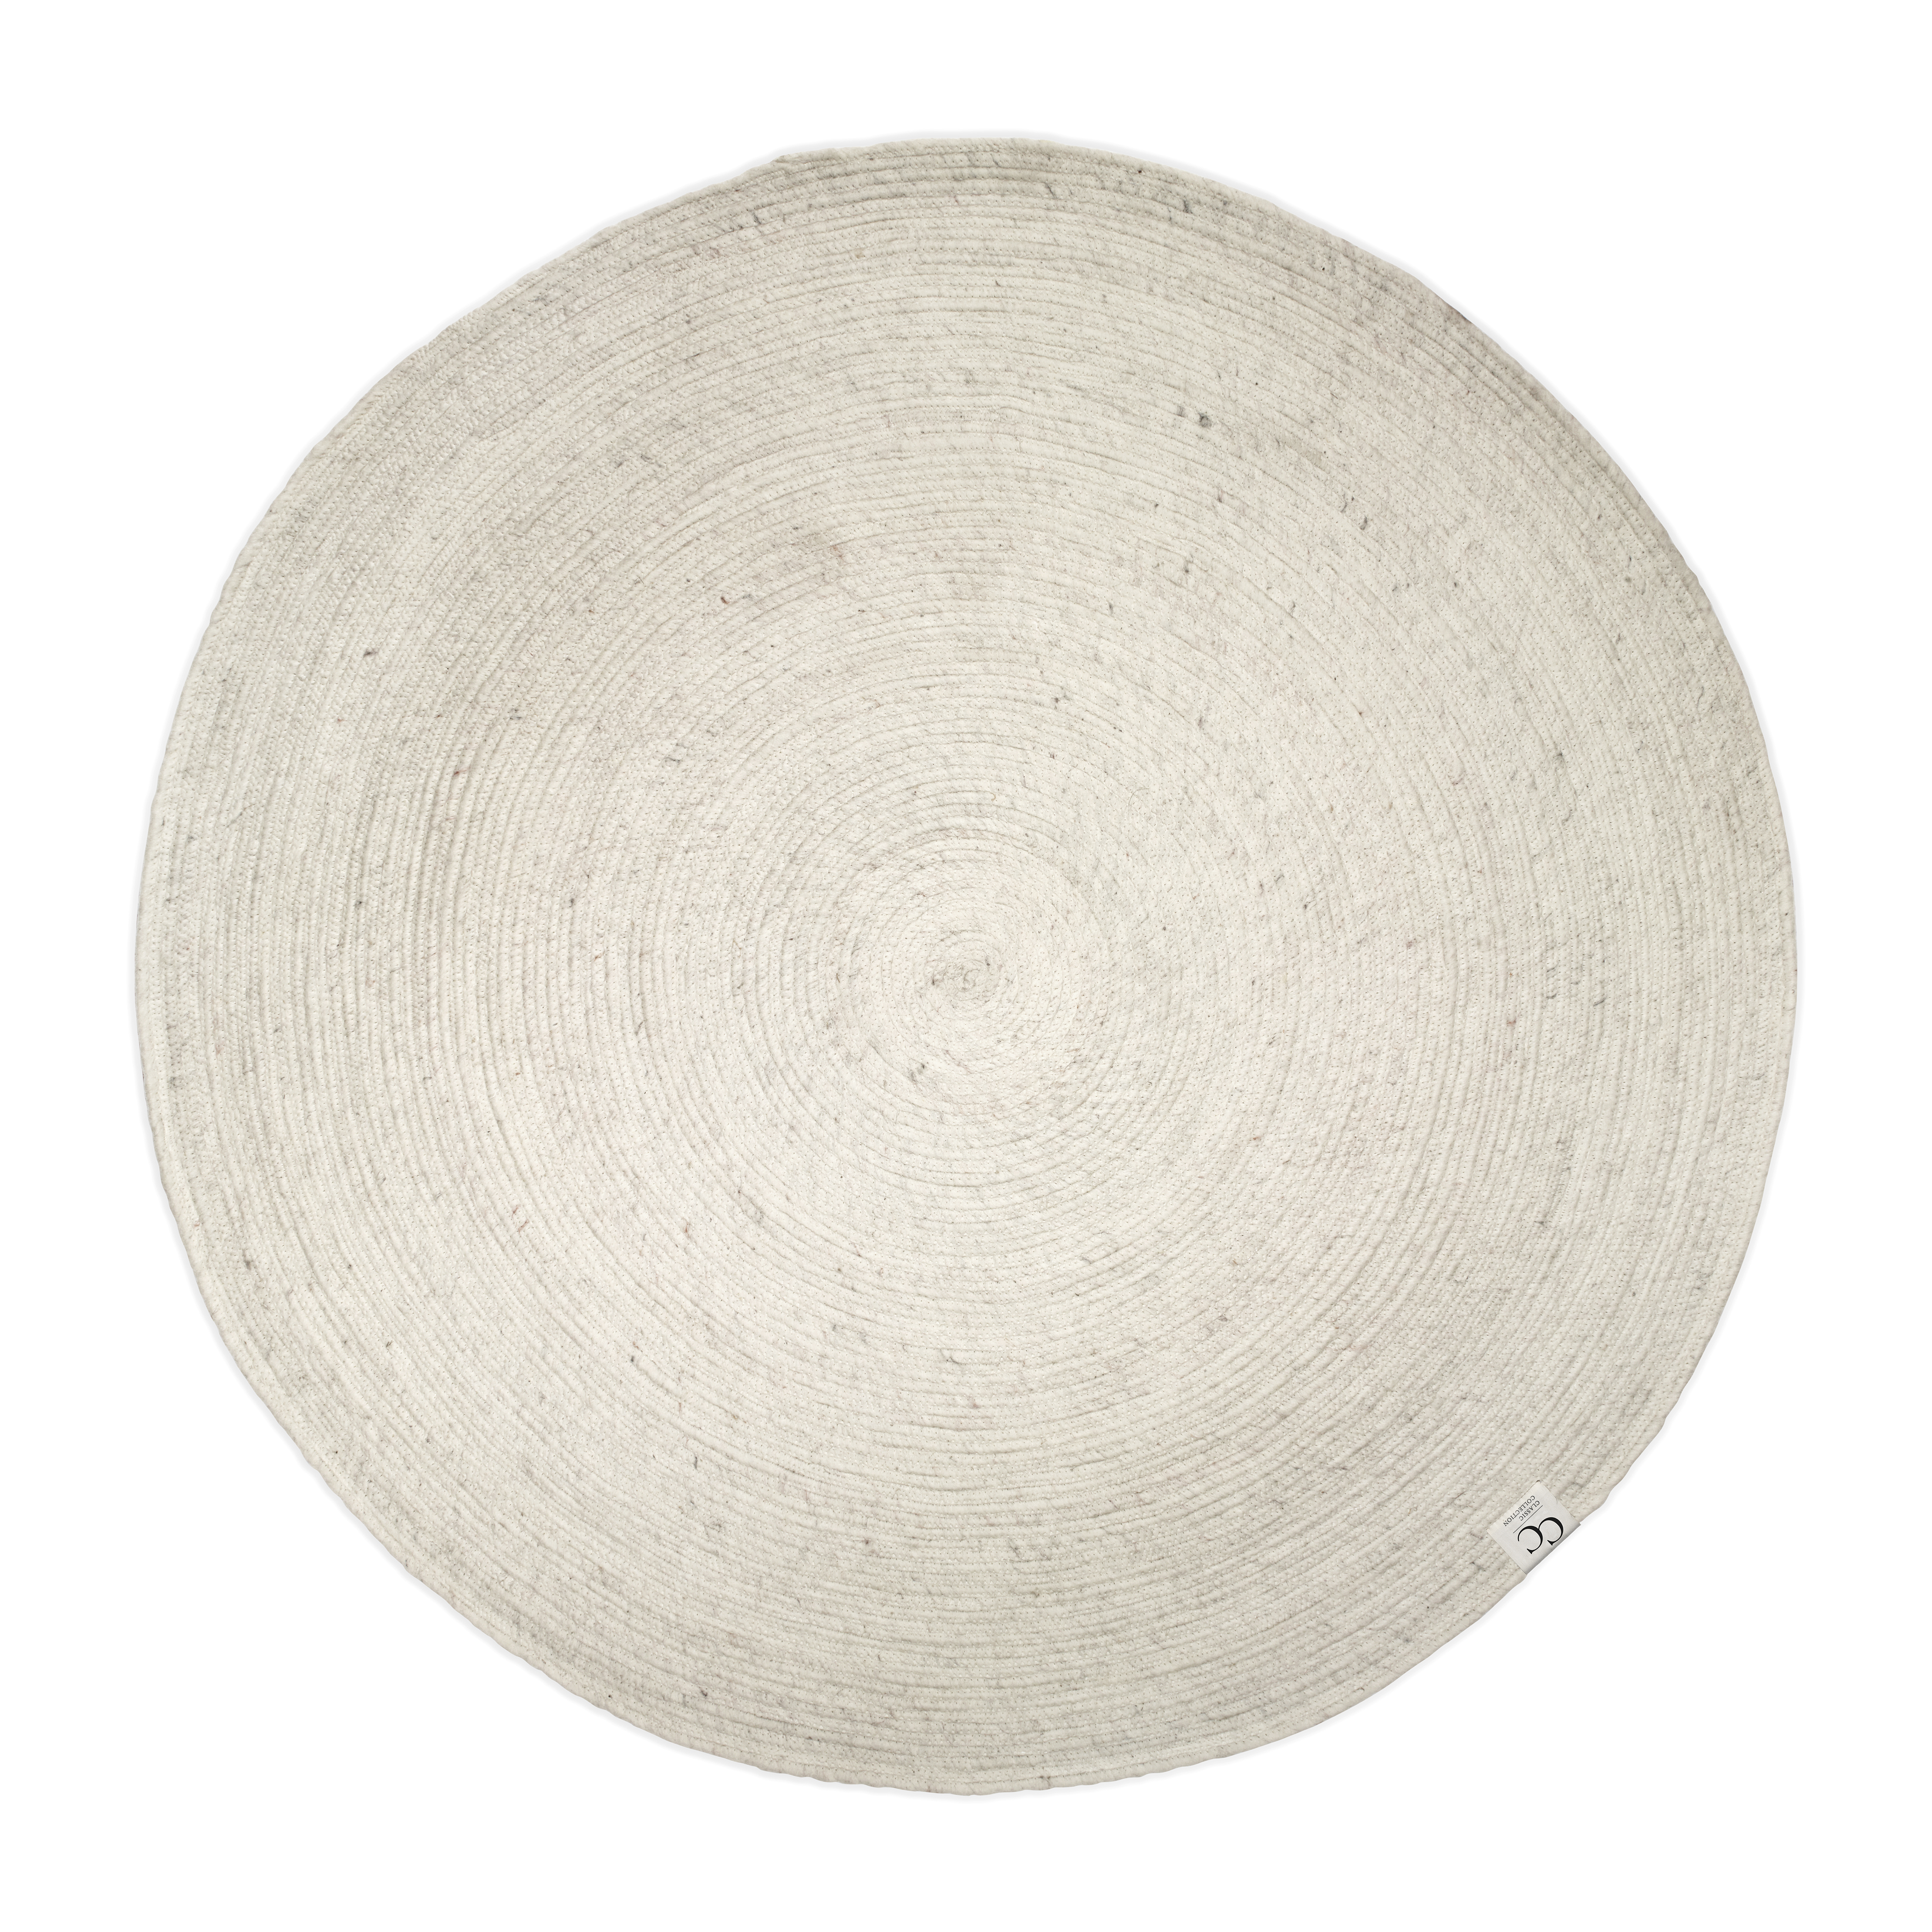 Merino wool carpet round Ø200 cm from Classic Collection